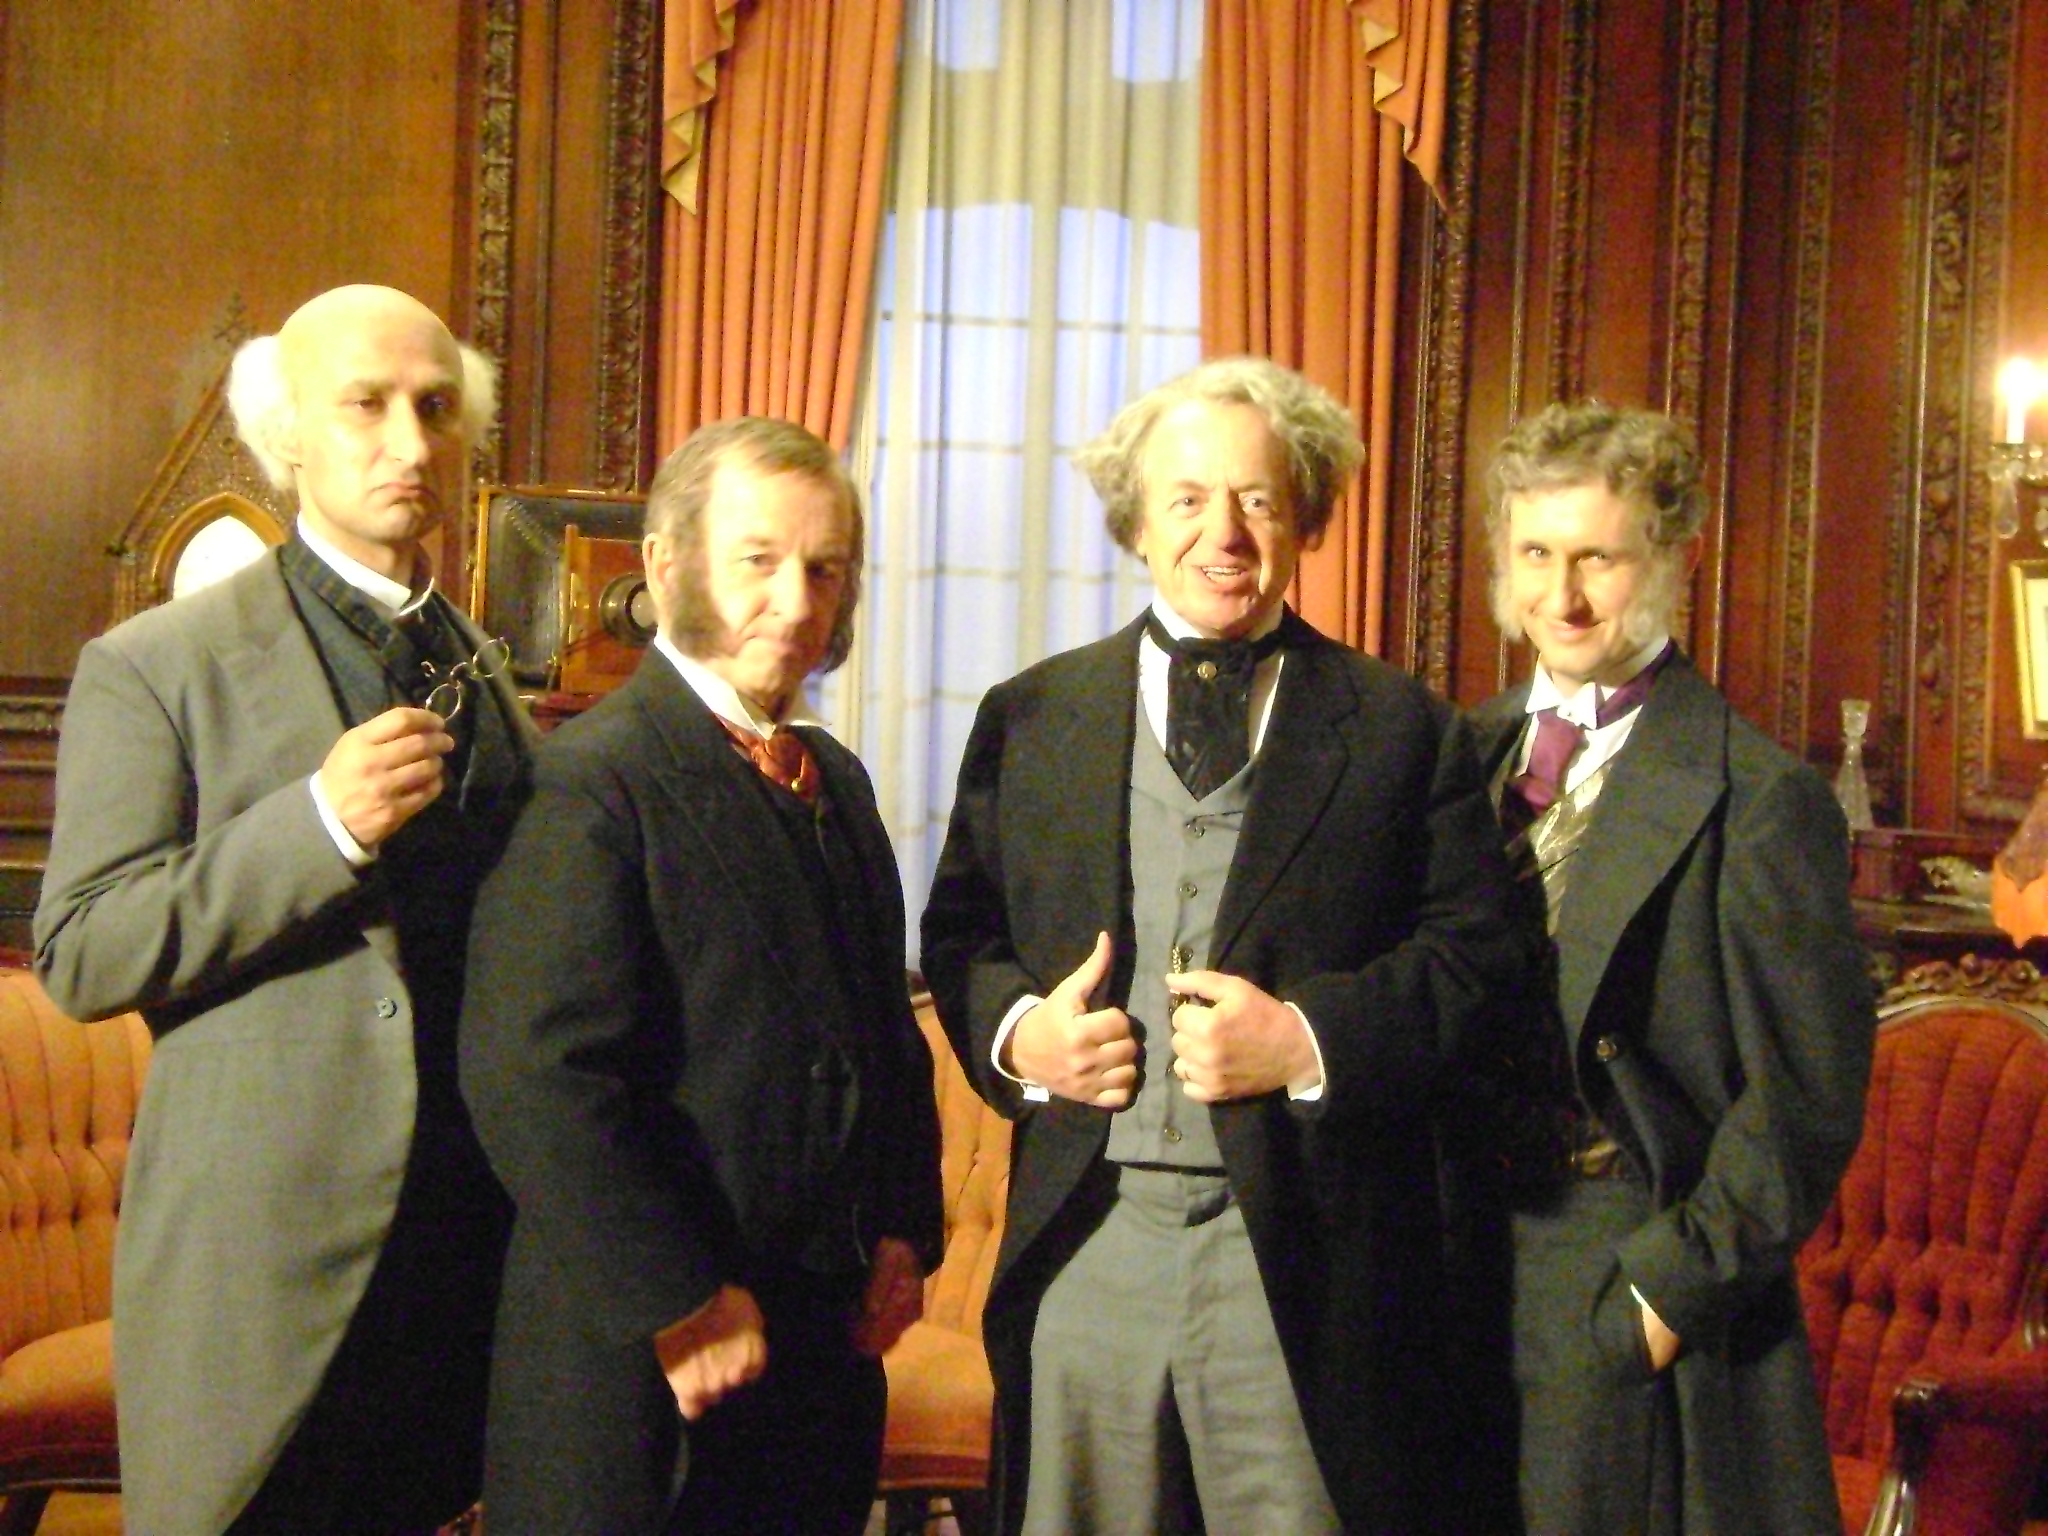 On set of The Ron James Show, Raoul Bhaneja as Sir Wilfred Laurier with Eric Peterson, Ron James and Michael Therriault.